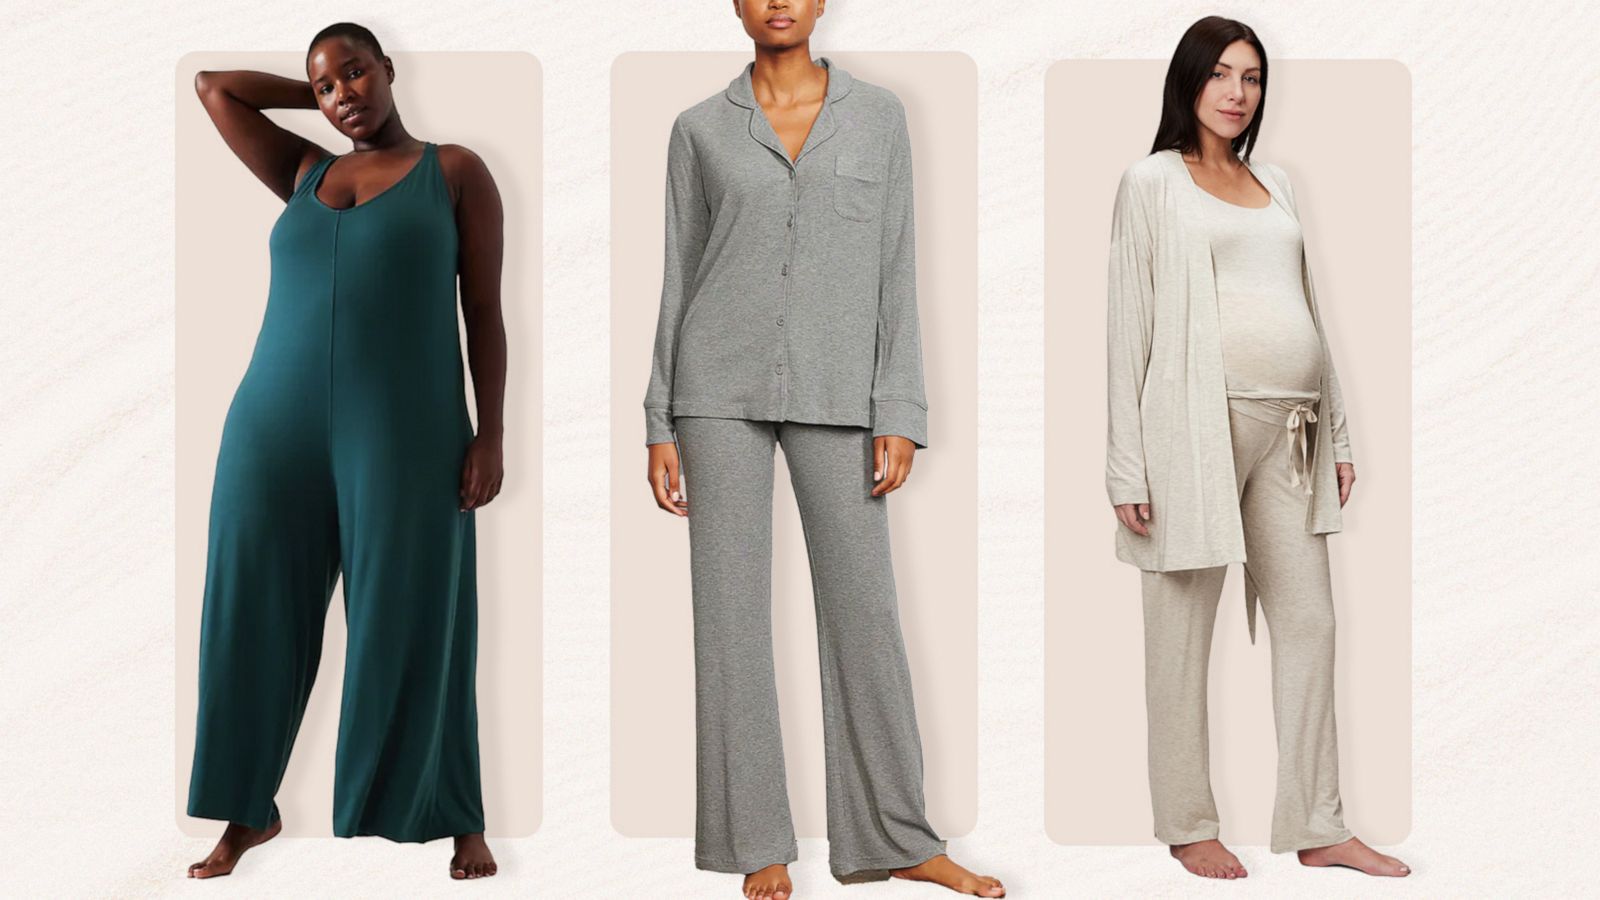 Postpartum fashion finds you'll love wearing and lounging in - Good Morning  America